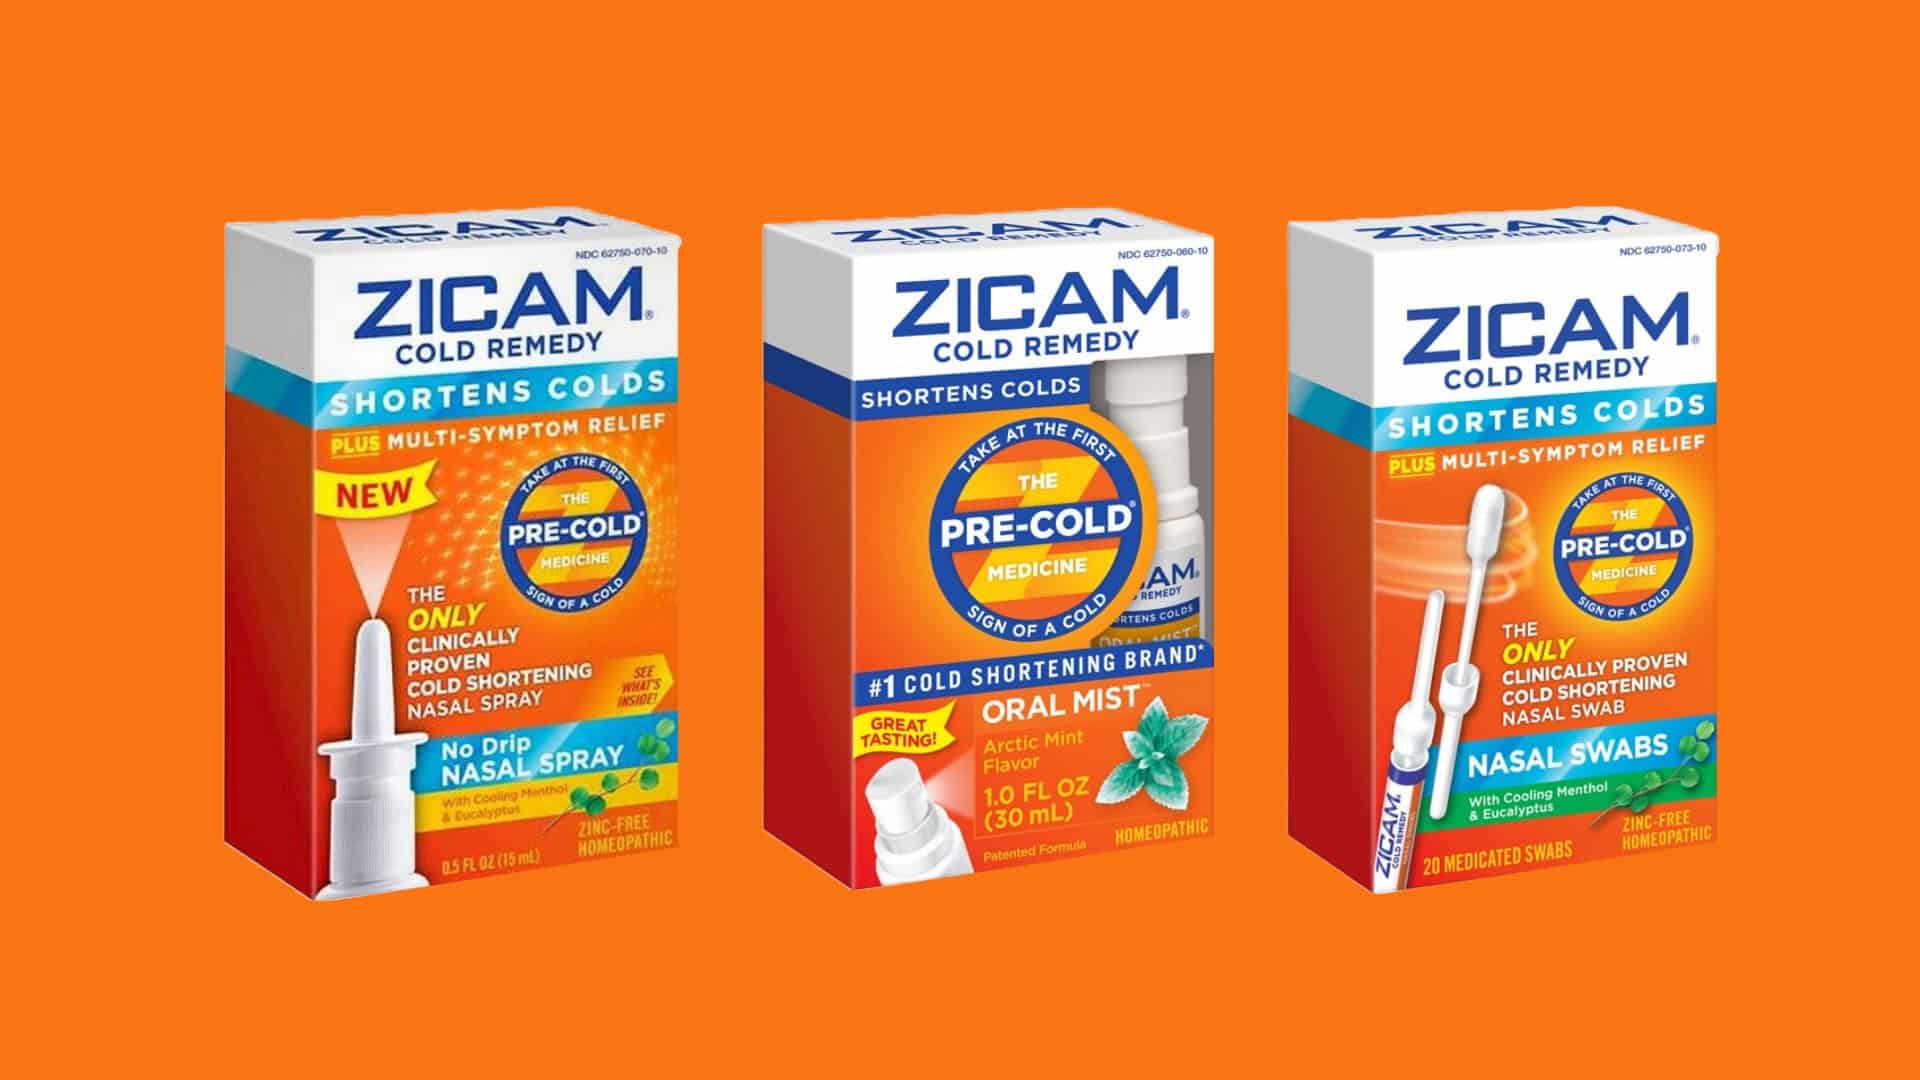 Here’s What Happens When You Take Zicam